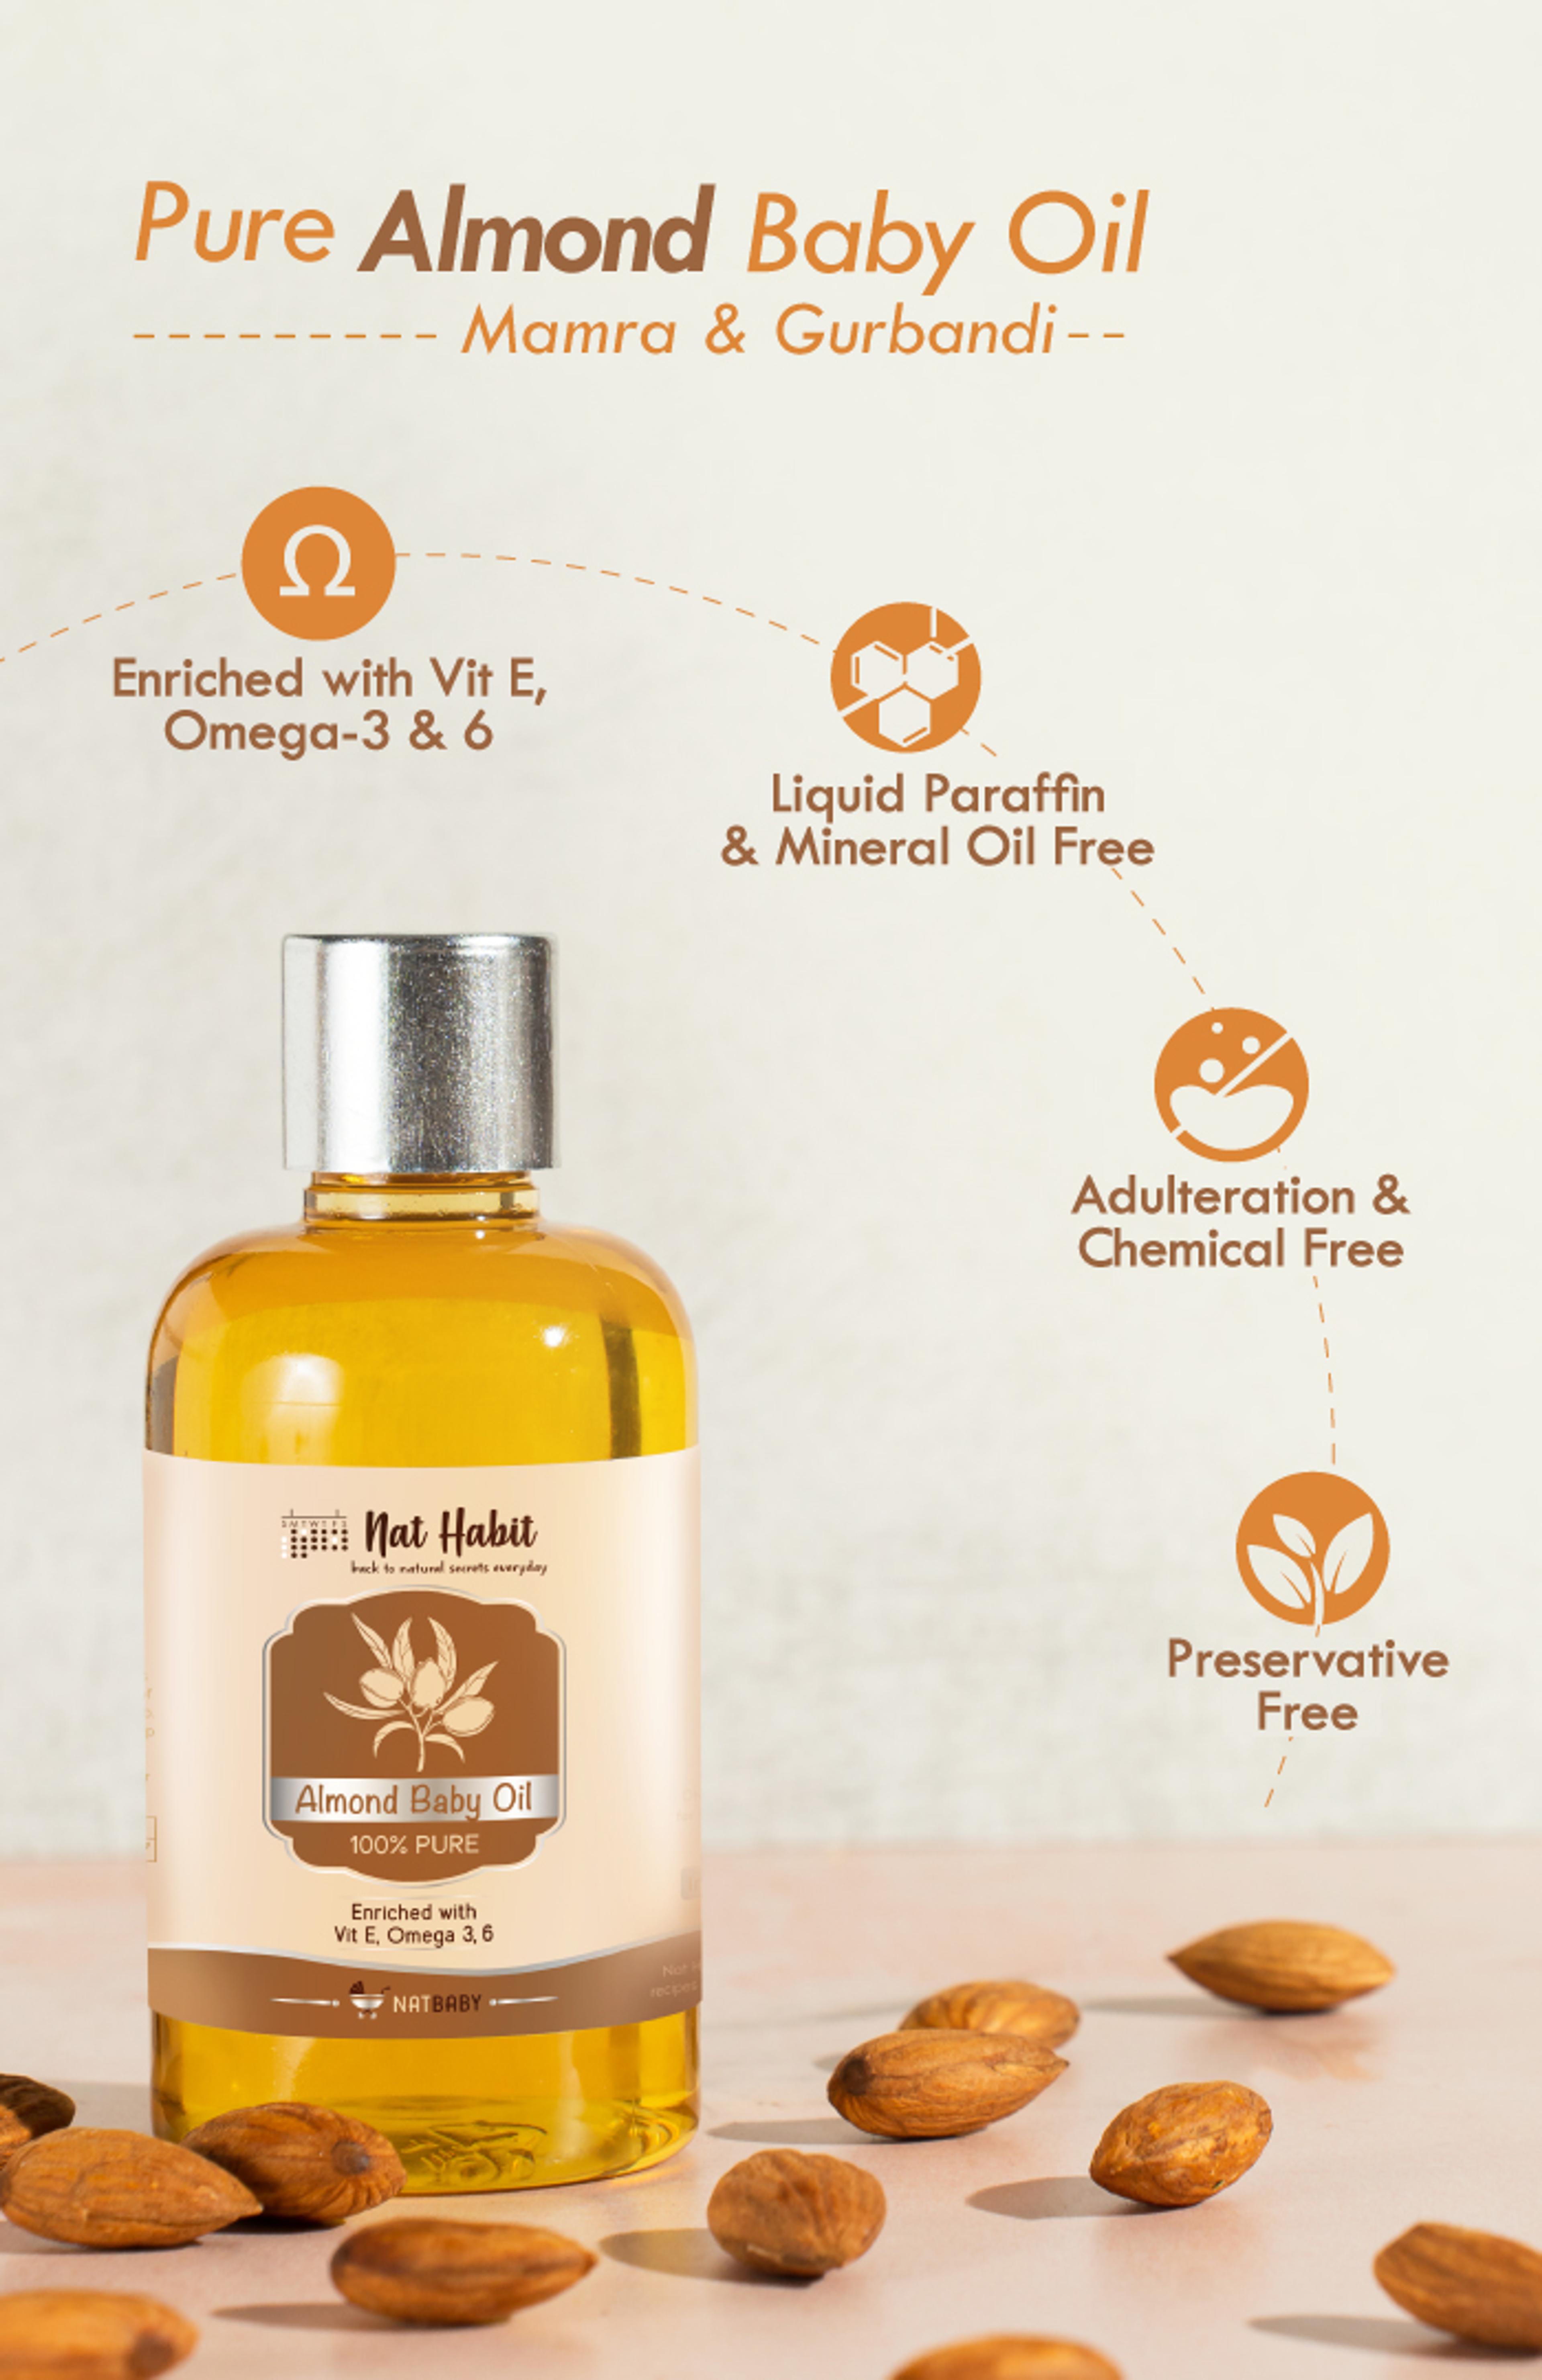 Almond-baby-oil-2